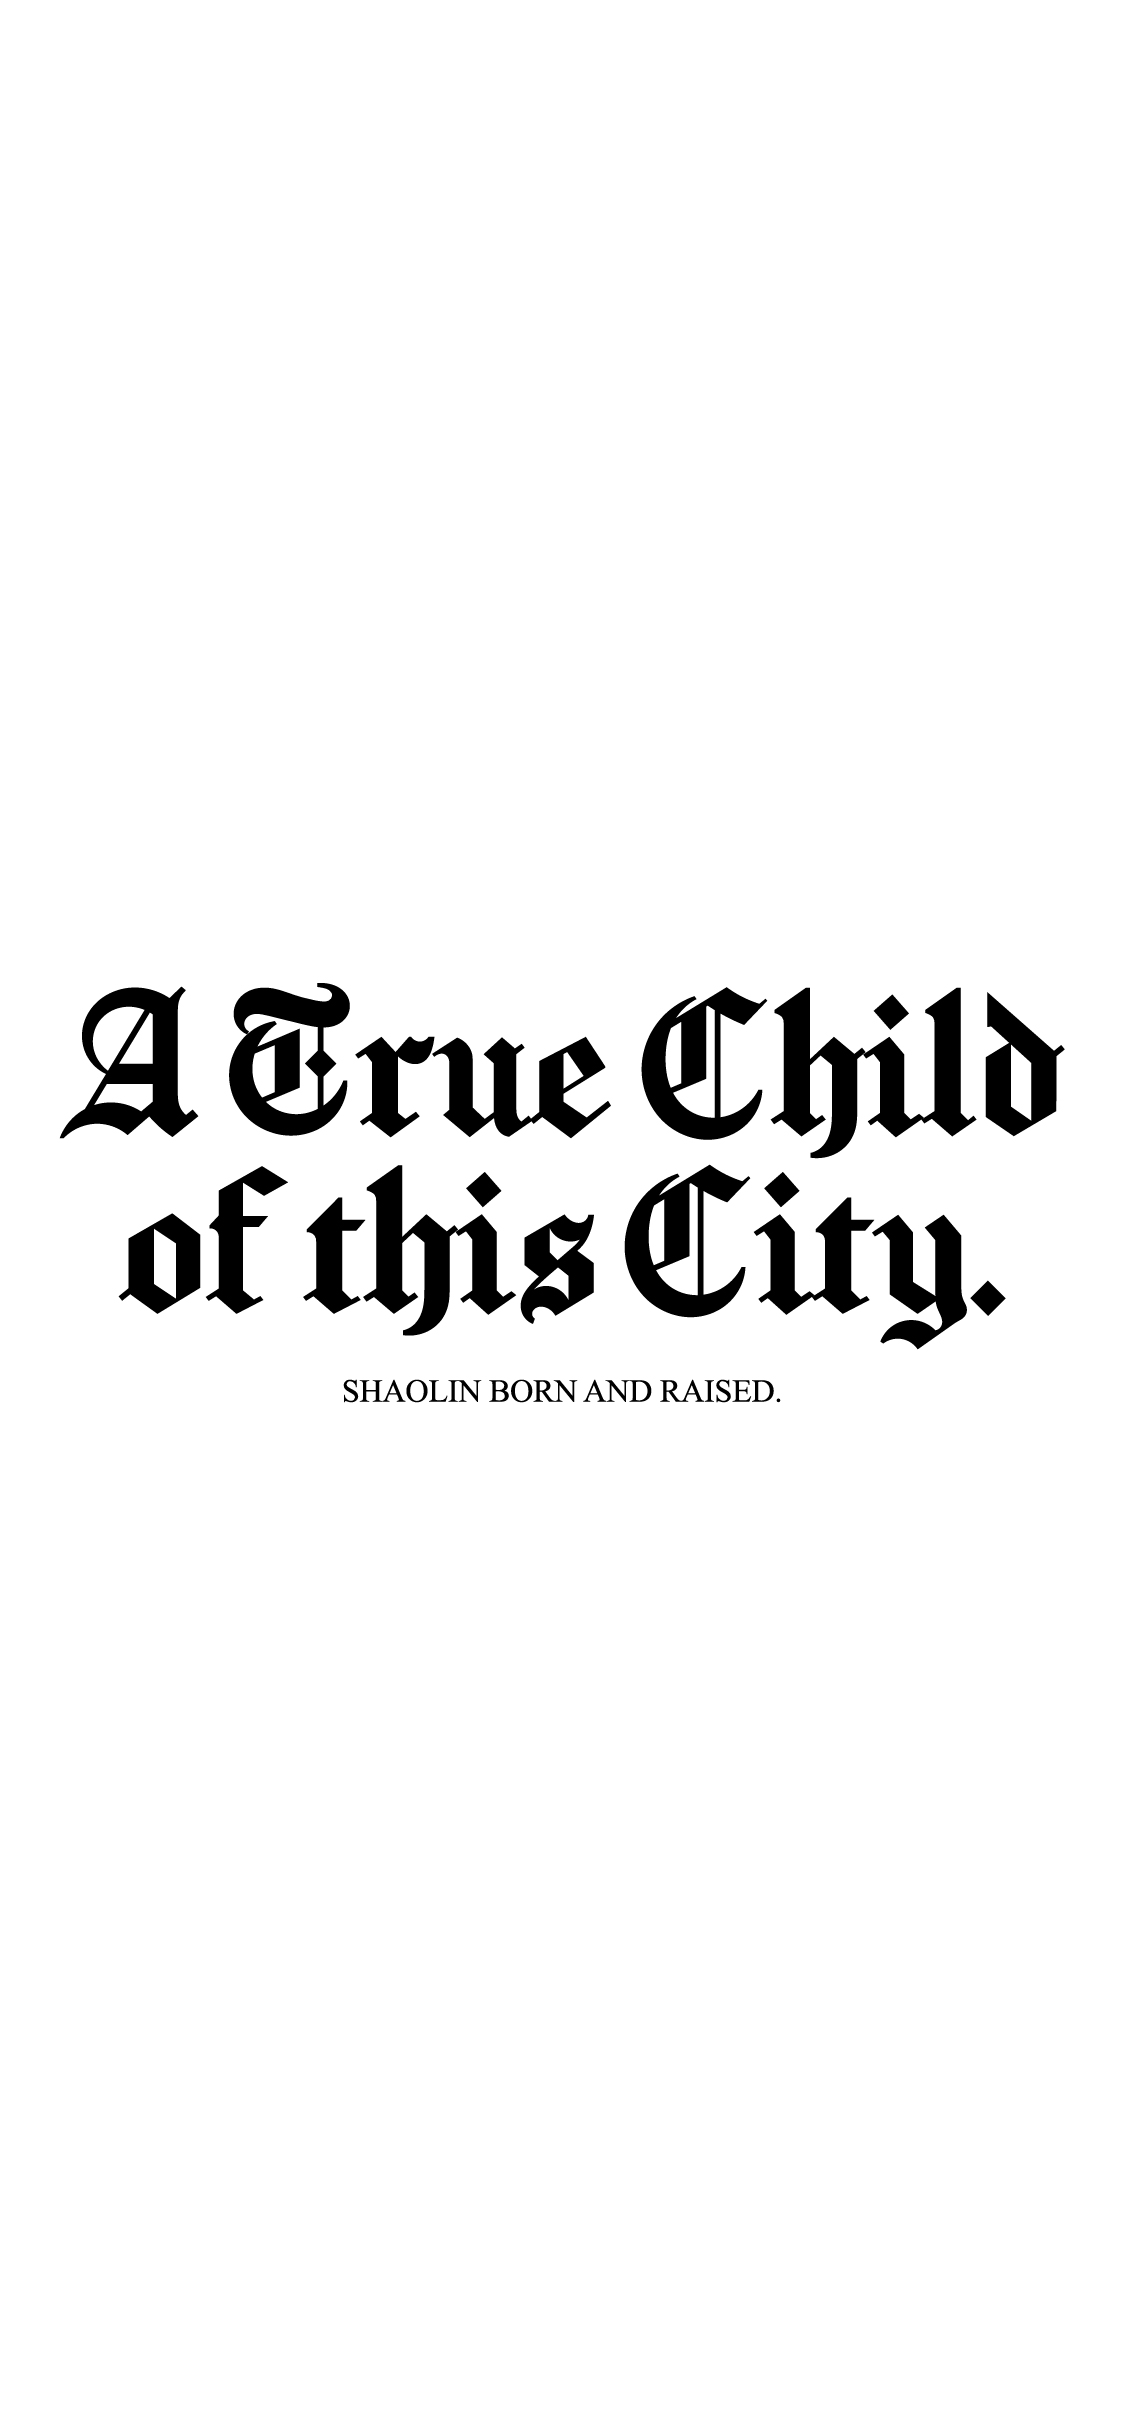 phone wallpaper displaying nyc // a true child of the city (new york times, shaolin)